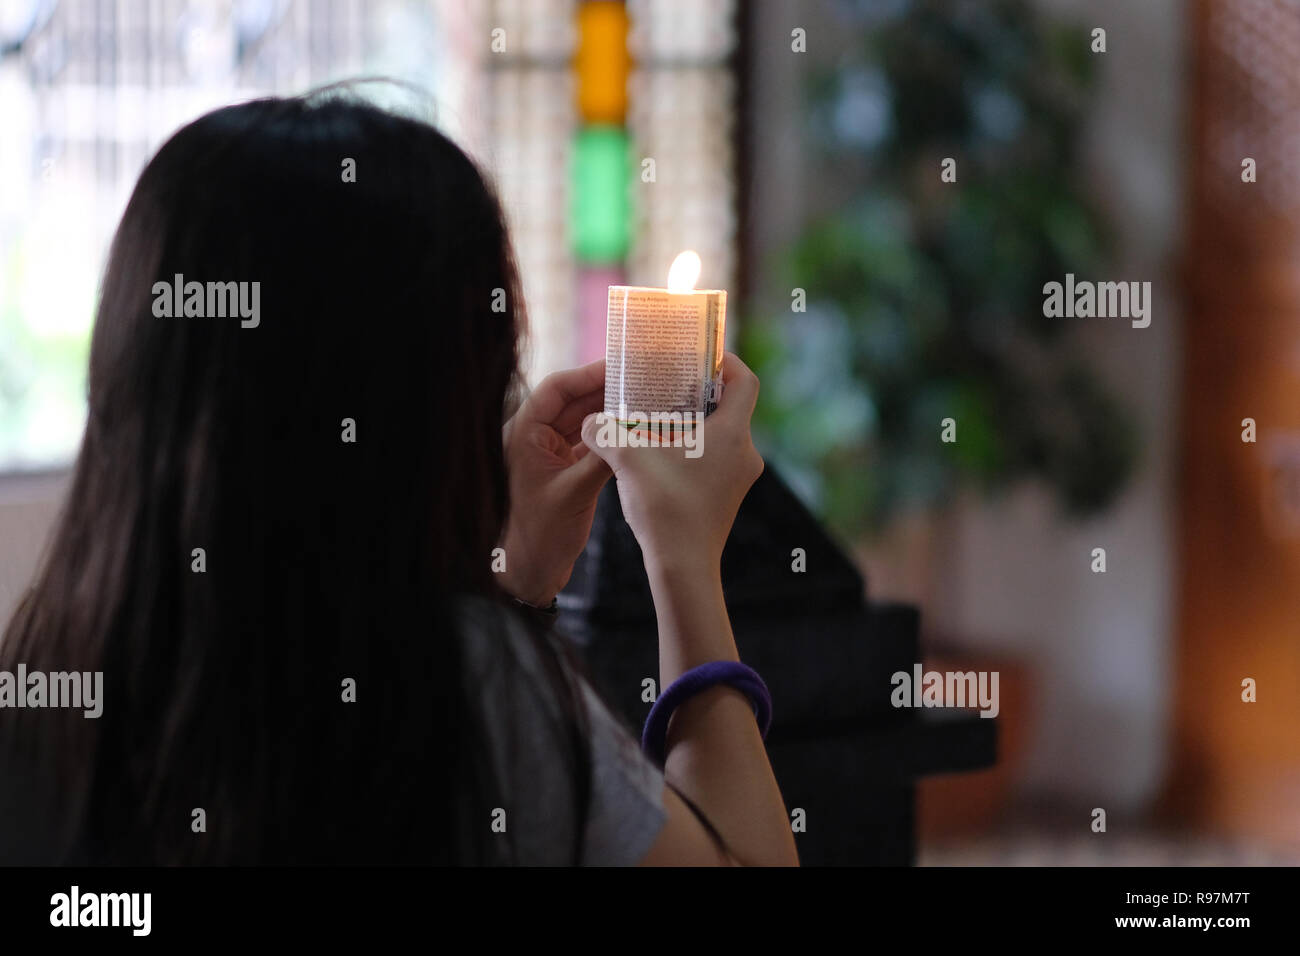 A Filipino woman lights candle inside the Roman Catholic Antipolo Cathedral or National Shrine of Our Lady of Peace and Good Voyage located in the city of Antipolo, in the province of Rizal in the Philippines. Stock Photo